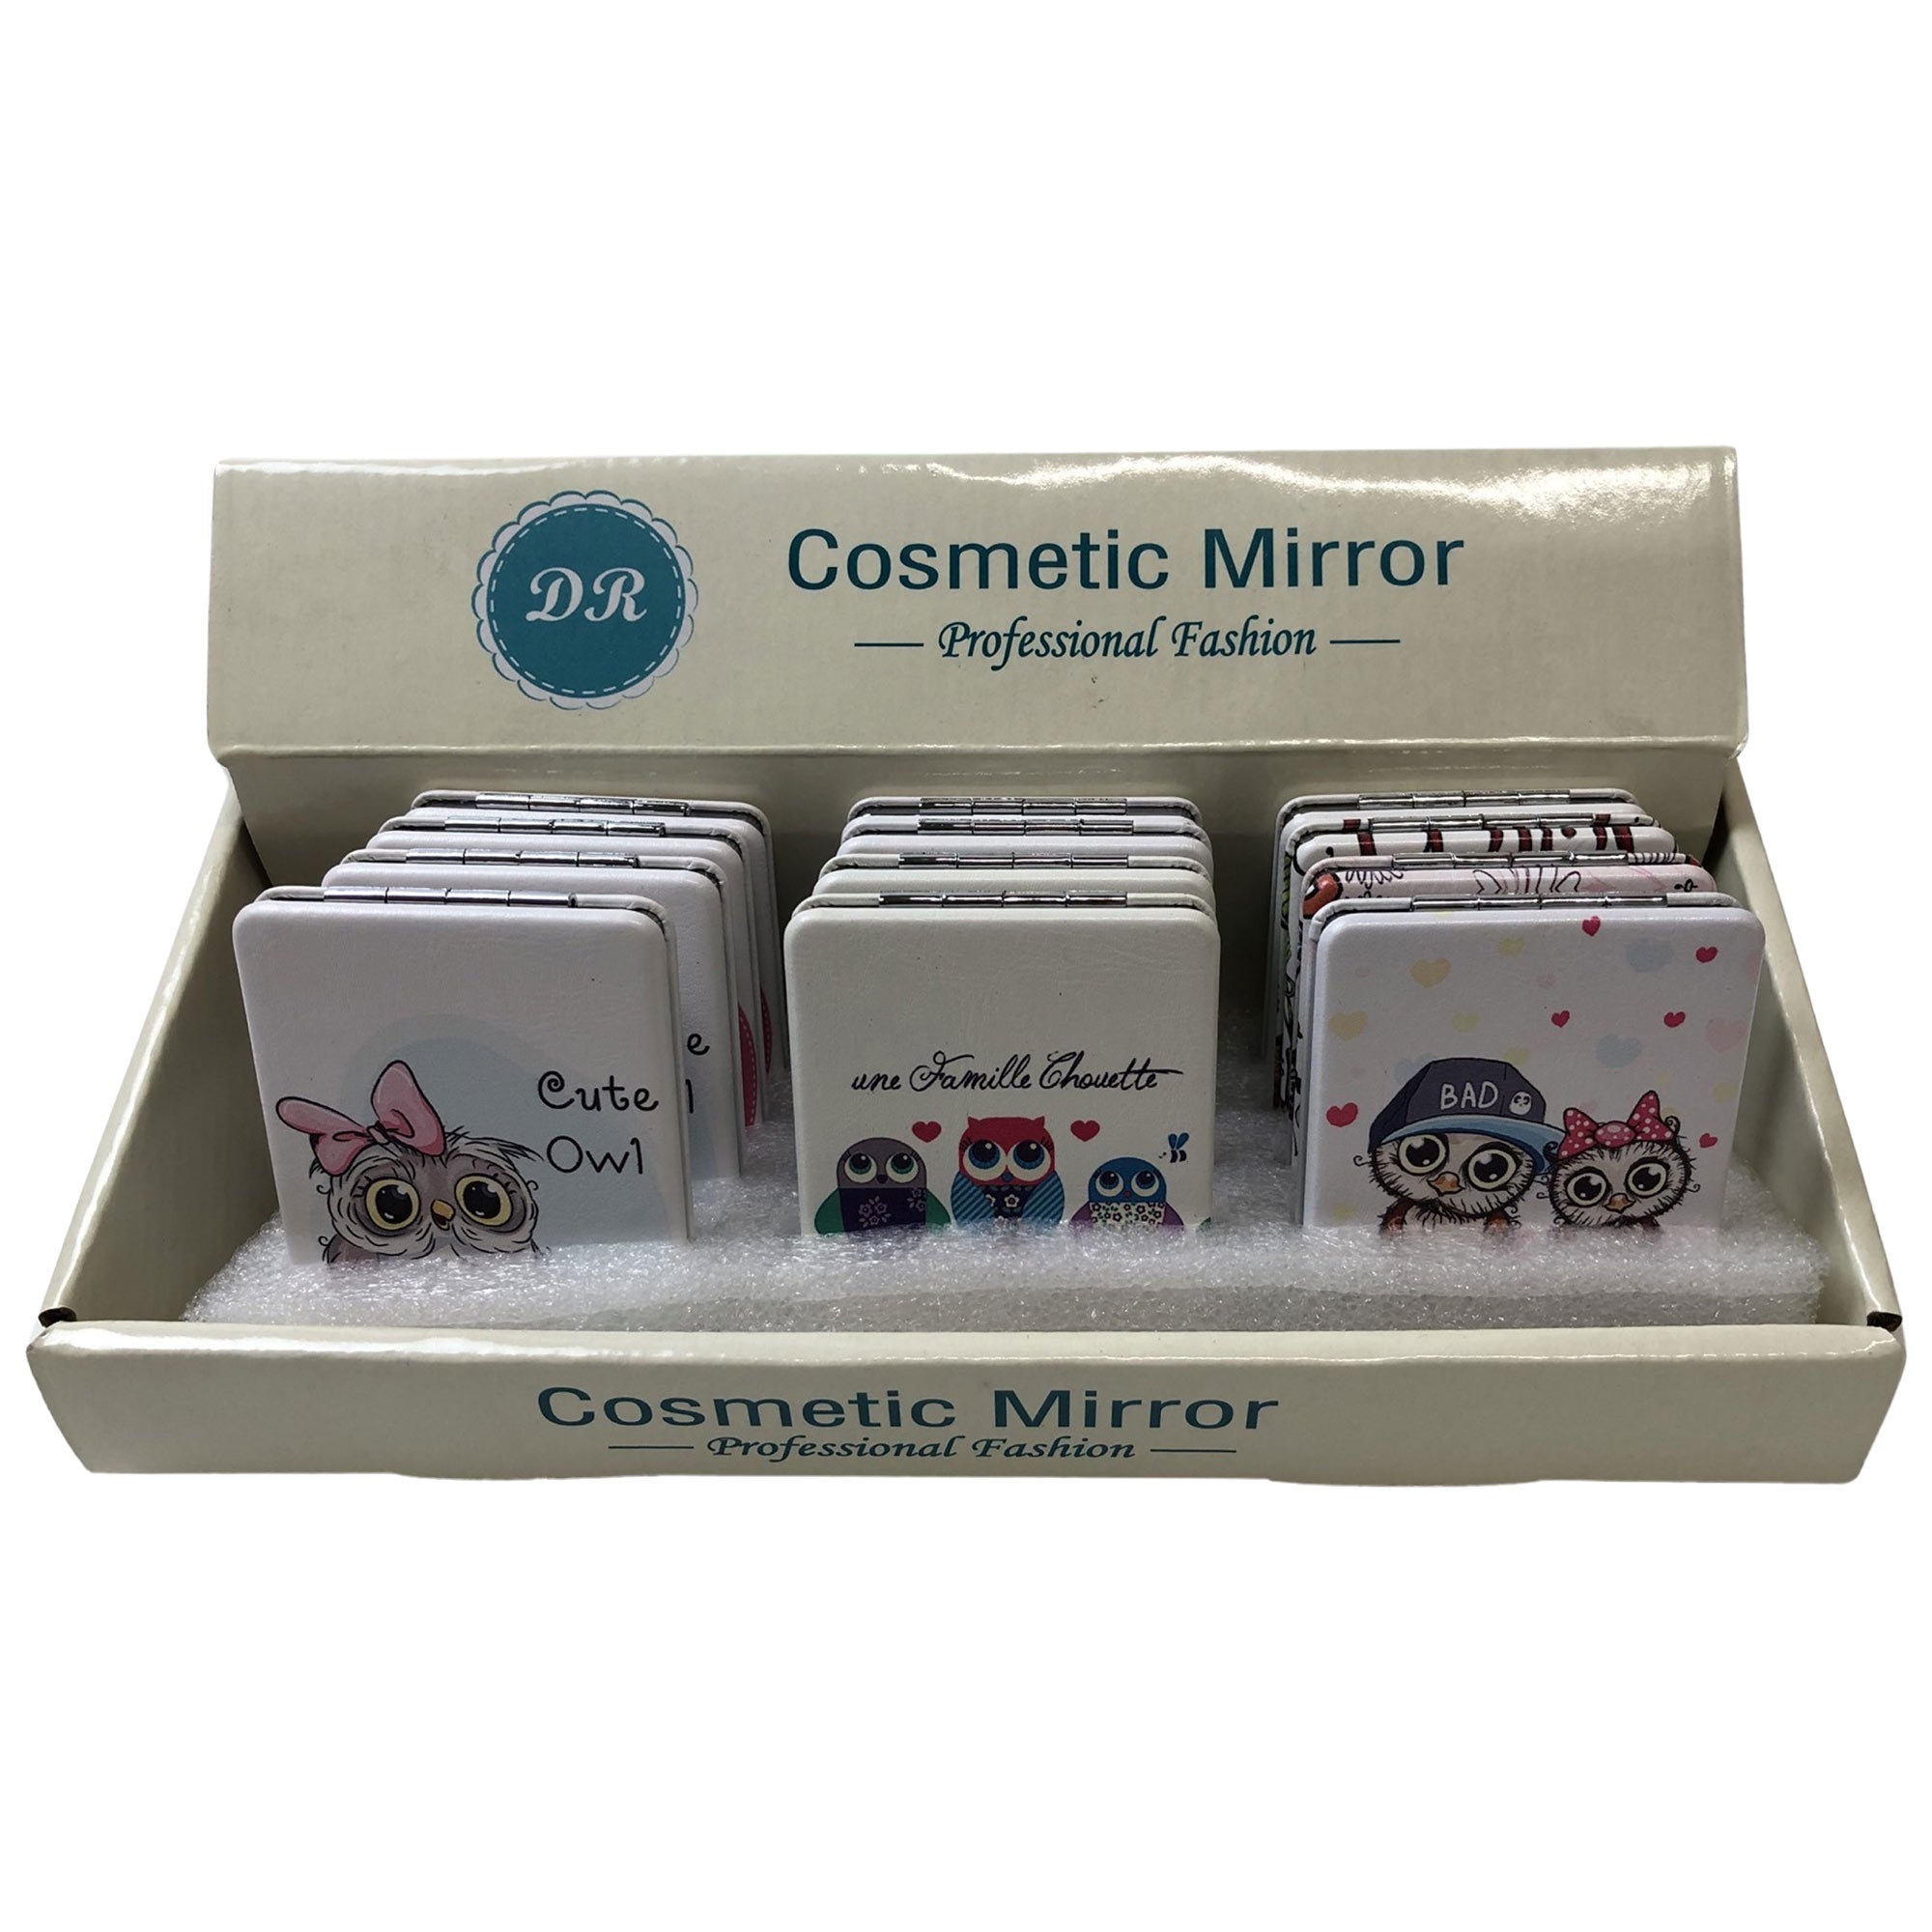 CLEARANCE COSMETIC MIRRORS OWL PRINTS (CASE OF 48 - $1.50 / PIECE)  Wholesale Cosmetic Mirrors in Owl Prints SKU: 901-OWL-48